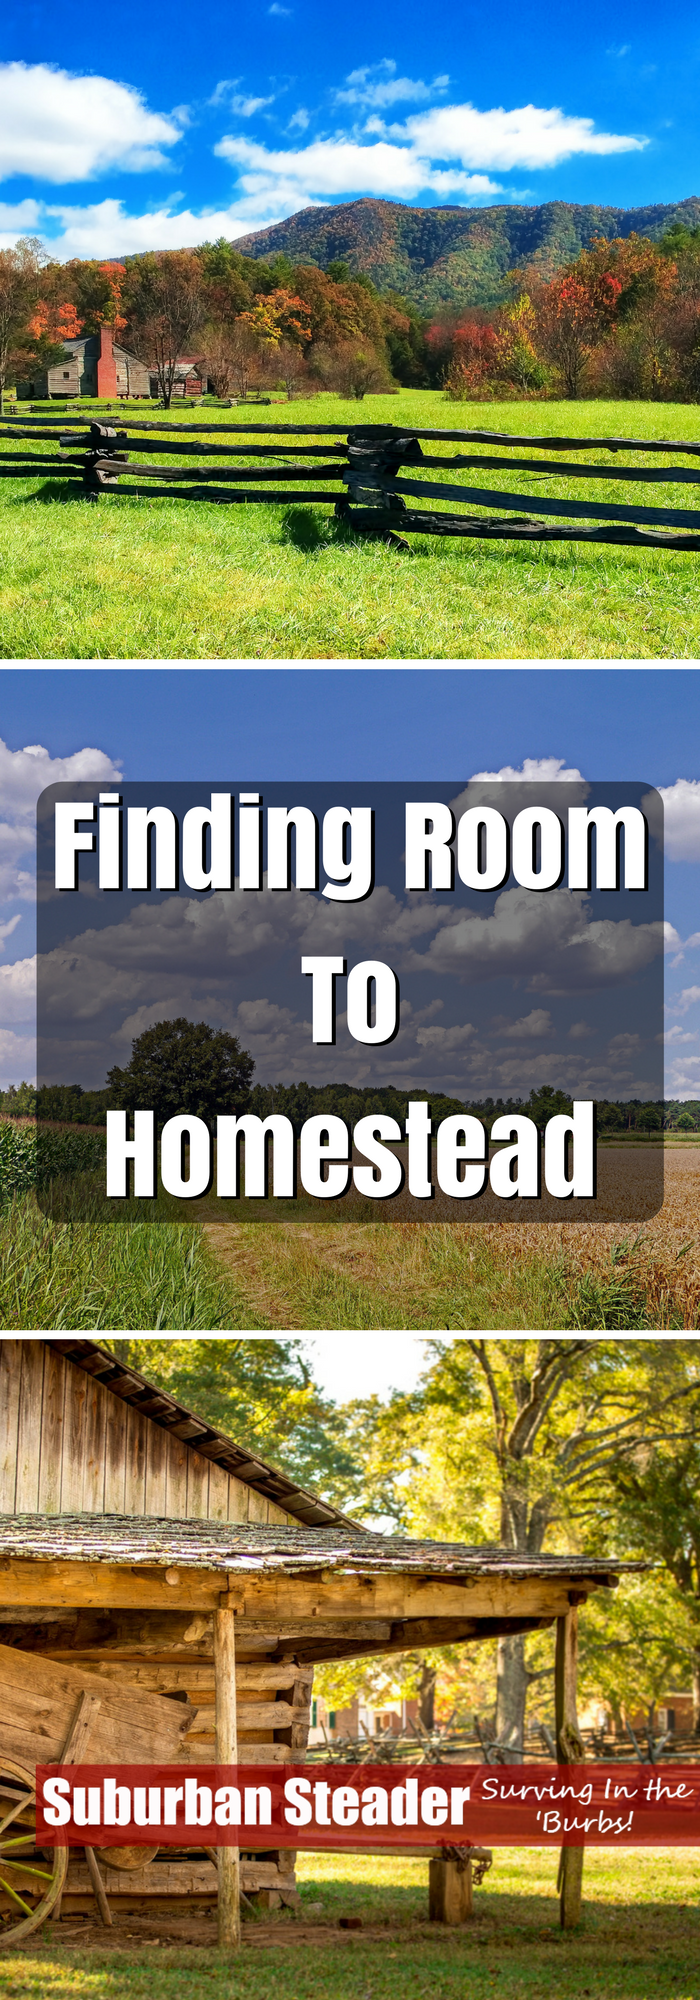 Finding Room To Homestead